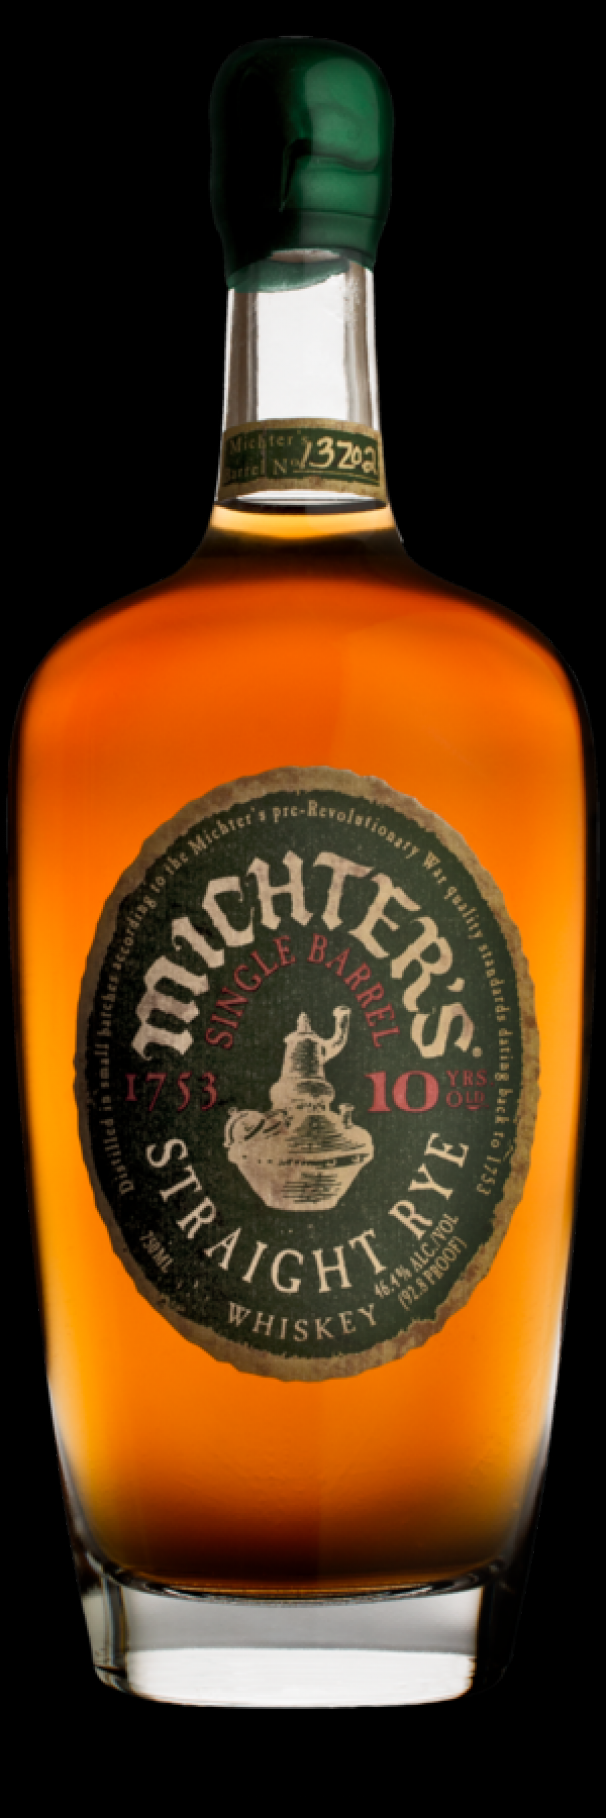 Michter's 10 Year Old Single Barrel Bourbon Ratings and Tasting Notes